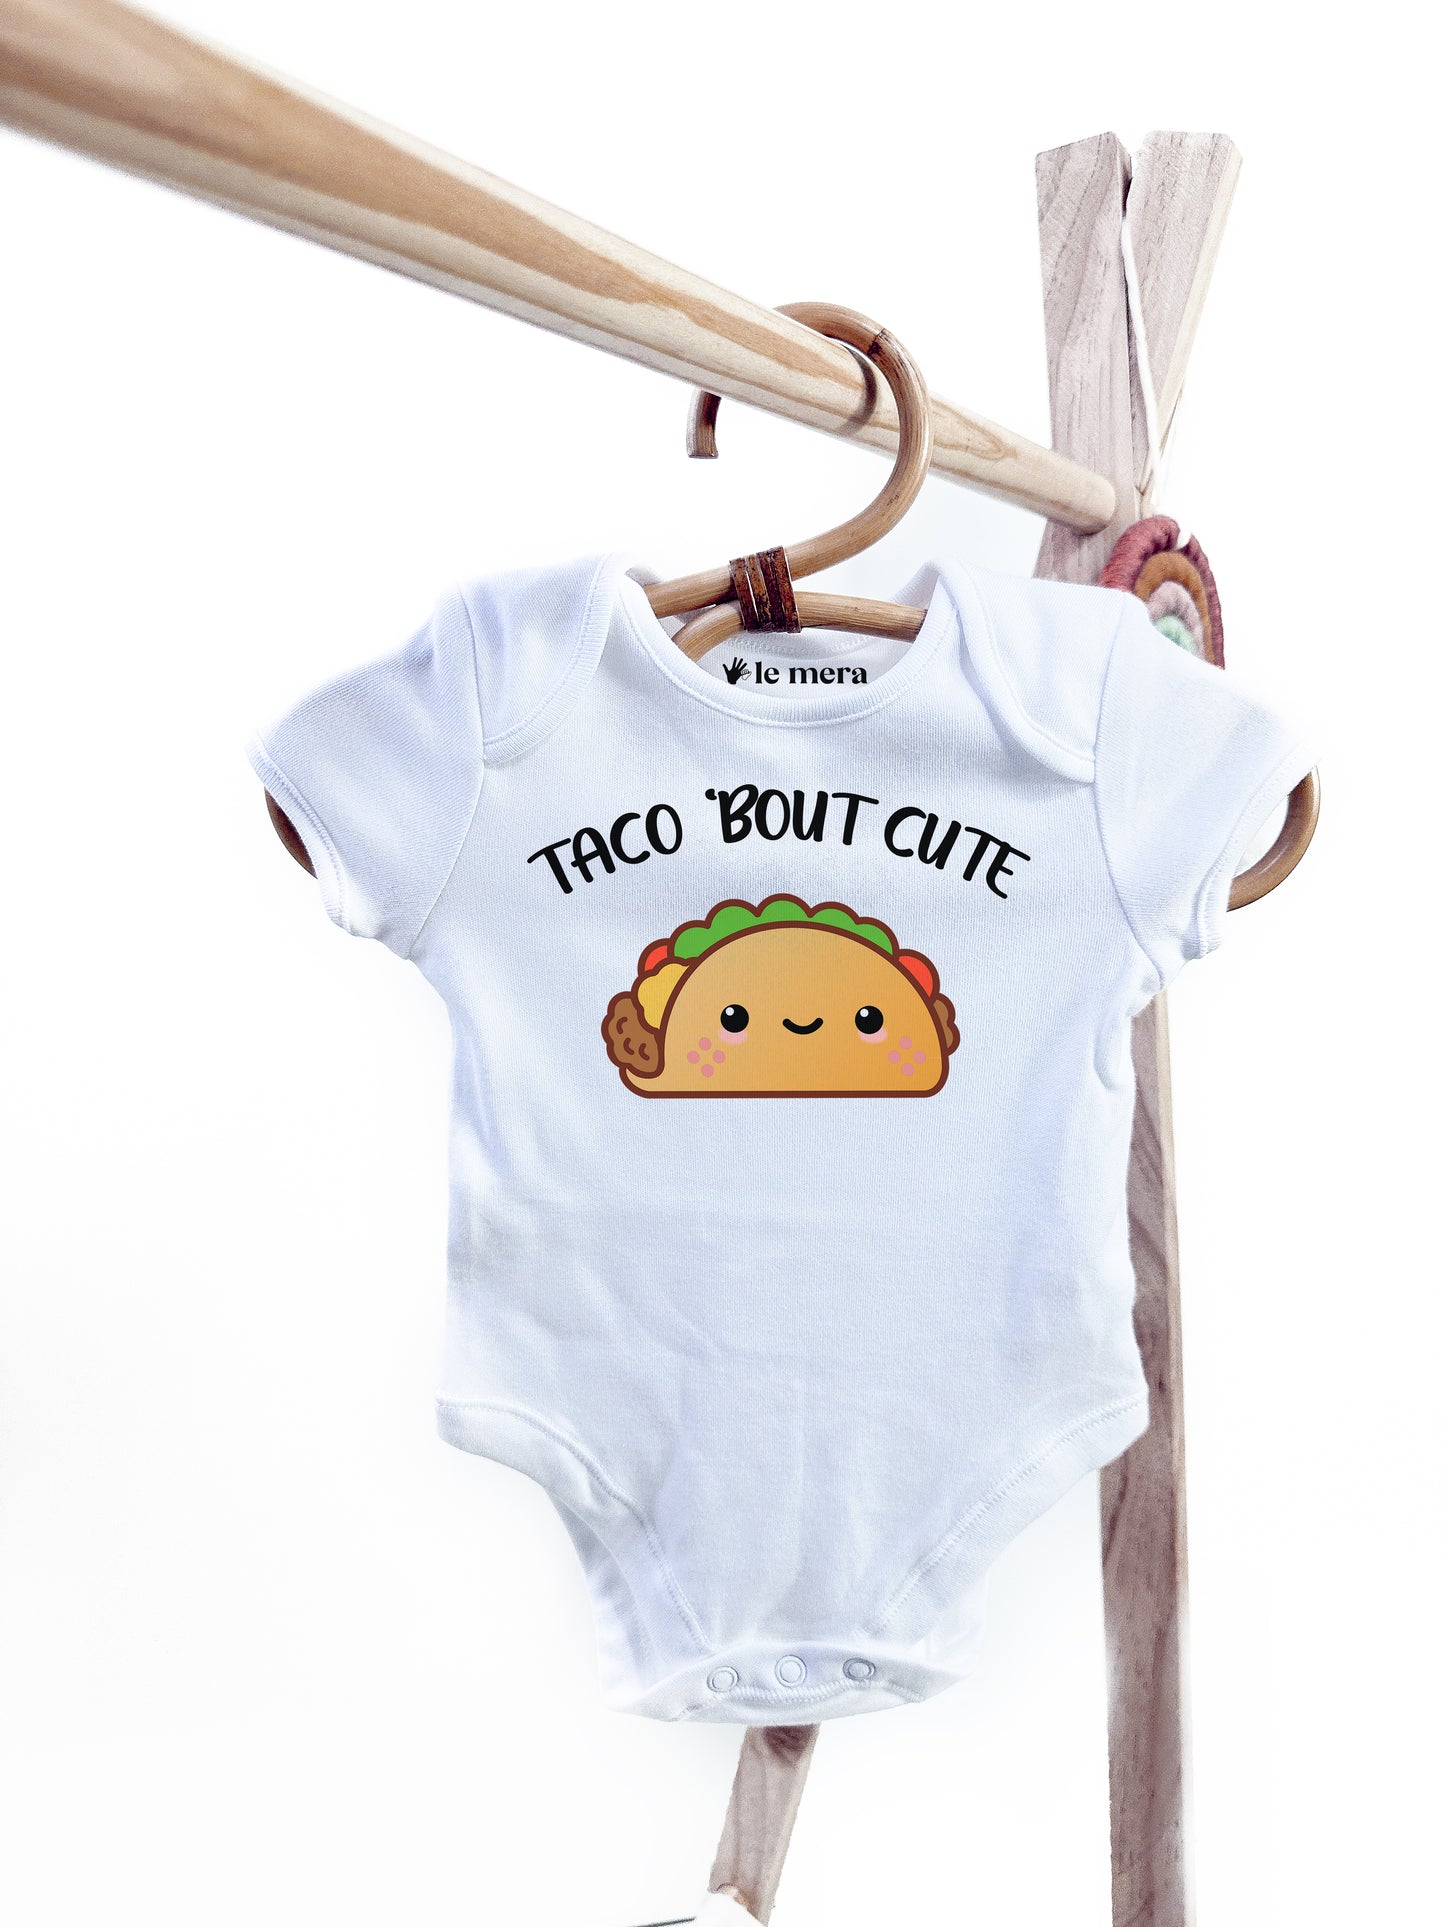 Taco Bout Cute, Cute Taco Baby Vest, Baby Grow